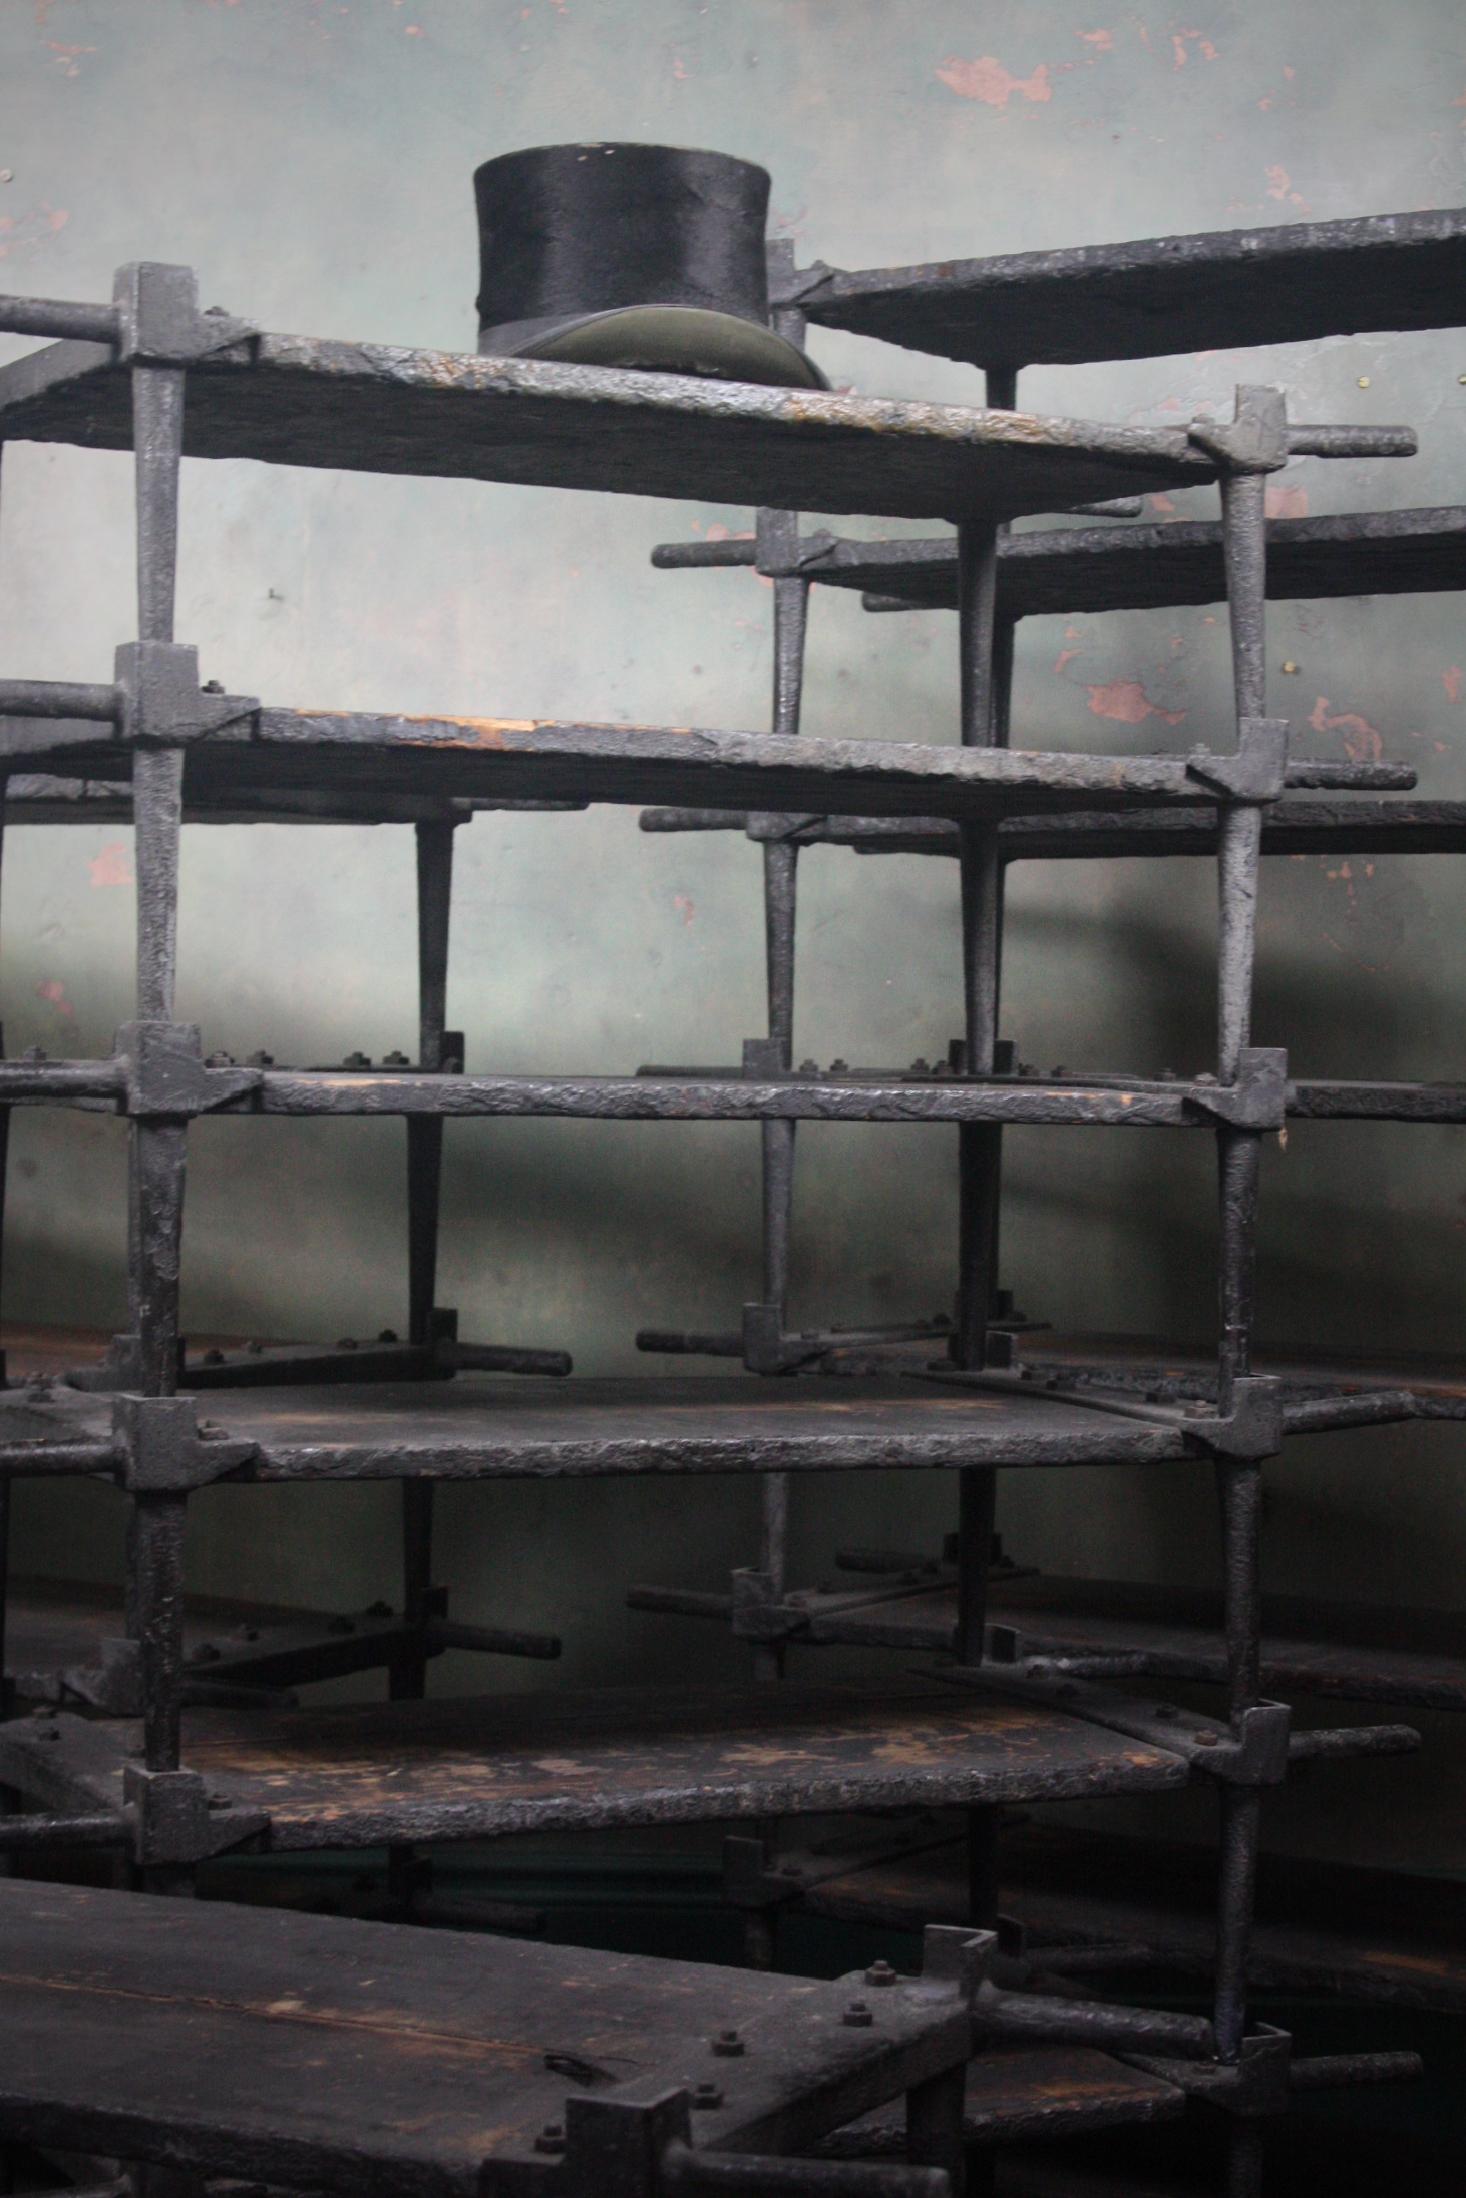 Wrought Iron Collection of 24 Victorian Foundry Cooling Racks Shelves Blacksmith